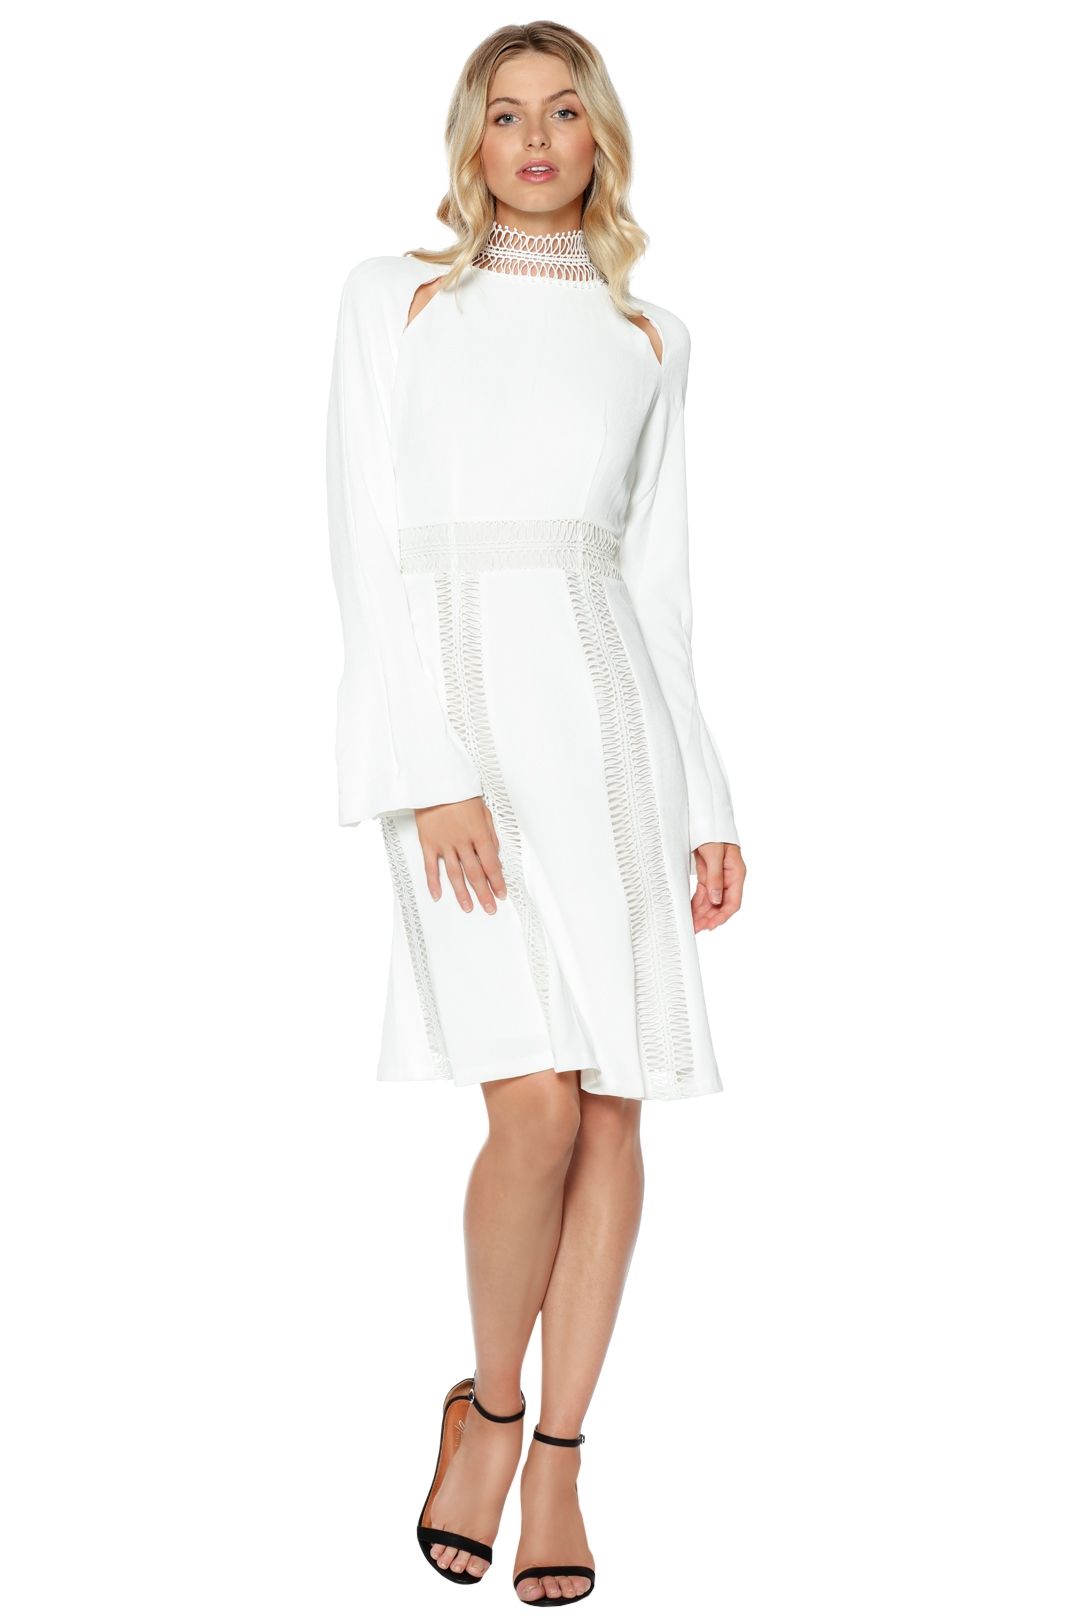 Ministry of Style - Azzedine Dress - Ivory - Front